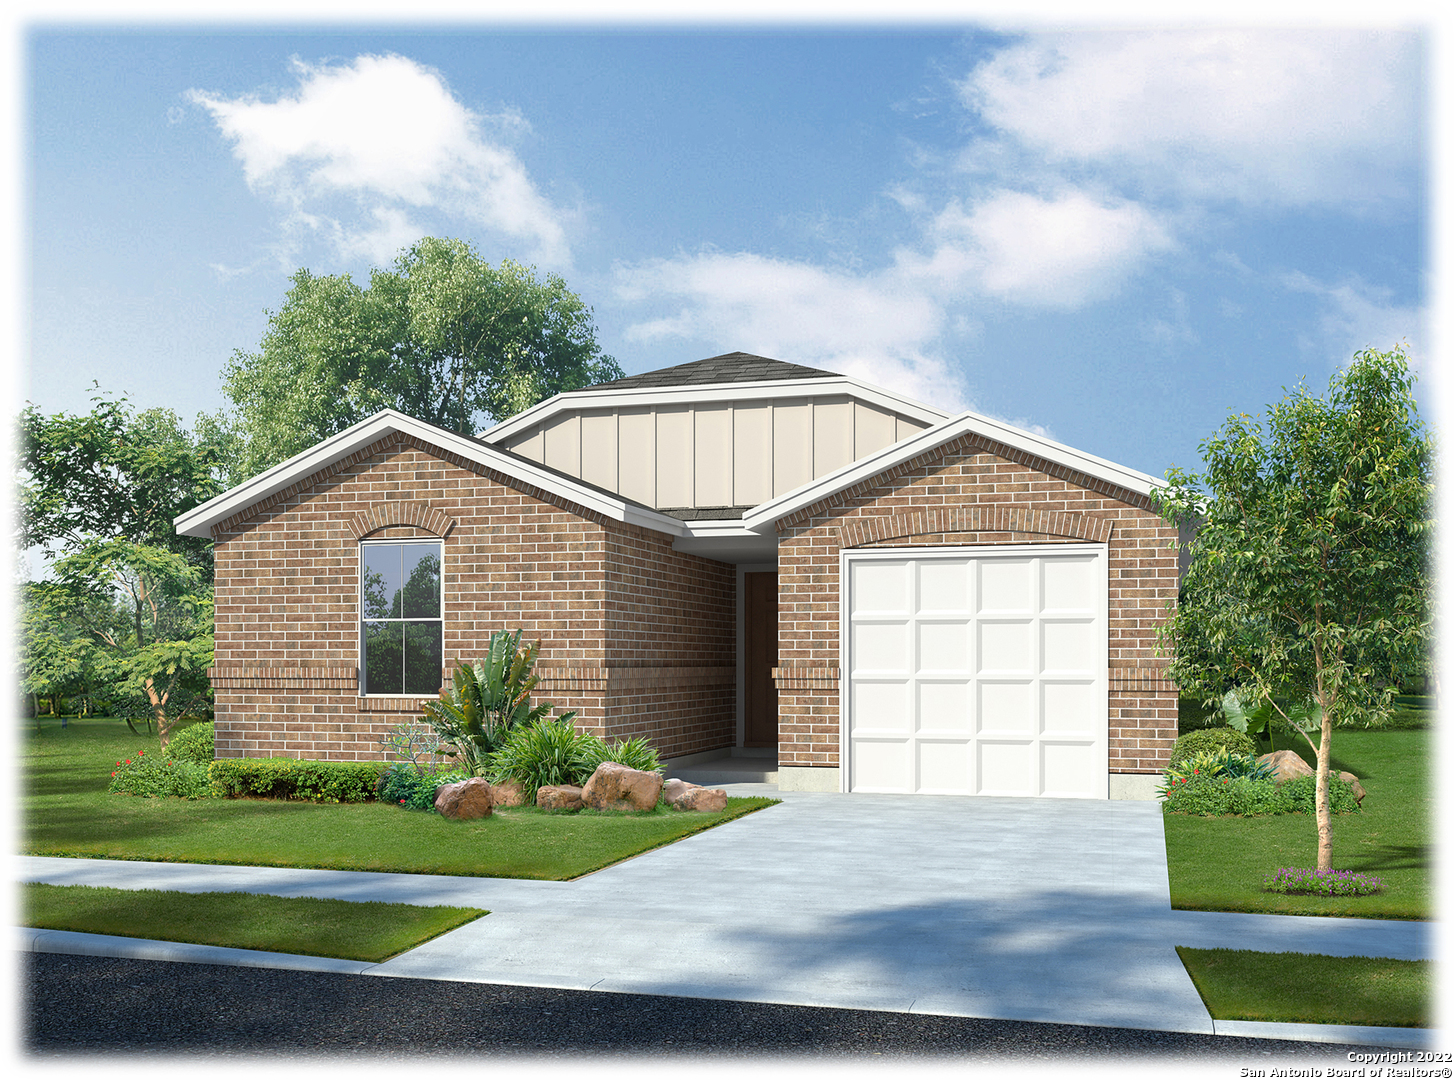 New construction homes at Whisper Falls in San Antonio, TX are now selling! This community is located on the far west side of San Antonio right off Hwy 90 & FM 211, near Lackland Air Force Base and SeaWorld. Floor plans vary from two to five bedrooms and include granite countertops (per plan), black or stainless steel appliances (per plan), 9-foot ceilings and much more. These spacious floor plans range from 945 square feet to over 2,600 square feet. Whisper Falls new construction homes will feature D.R. Horton's new smart home system, Home Is Connected, ensuring security and peace of mind. Residents will also enjoy an amazing resort-style amenity complex, and on-site Lifestyle Director, Medina Valley ISD schools, and easy access to major thoroughfares including Hwy. 90 & Loop 1604. Don't miss out on these new homes in a great location and at a great price! *USDA 100% Financing Available if you qualify!The Mabry is a single-story, 1310 sq. ft., 3 bedroom, 2 bathroom floor plan, designed to provide you a comfortable place to call home. The inviting entryway leads to a private hallway connecting the two secondary bedrooms and a full bath. The long foyer opens up into the spacious living area. The large dining area connects to the spacious kitchen. Enjoy preparing meals and spending time together gathered around the kitchen island. The bedroom 1 suite is located off the foyer. It includes a large walk-in closet with built-in shelving and a relaxing ensuite. You'll enjoy added security in your new home with our Home is Connected features. Using one central hub that talks to all the devices in your home, you can control the lights, thermostat and locks, all from your cellular device. Additional features include sheet vinyl flooring at entry, downstairs living areas, and wet areas, black appliances and flat panel maple cabinets.